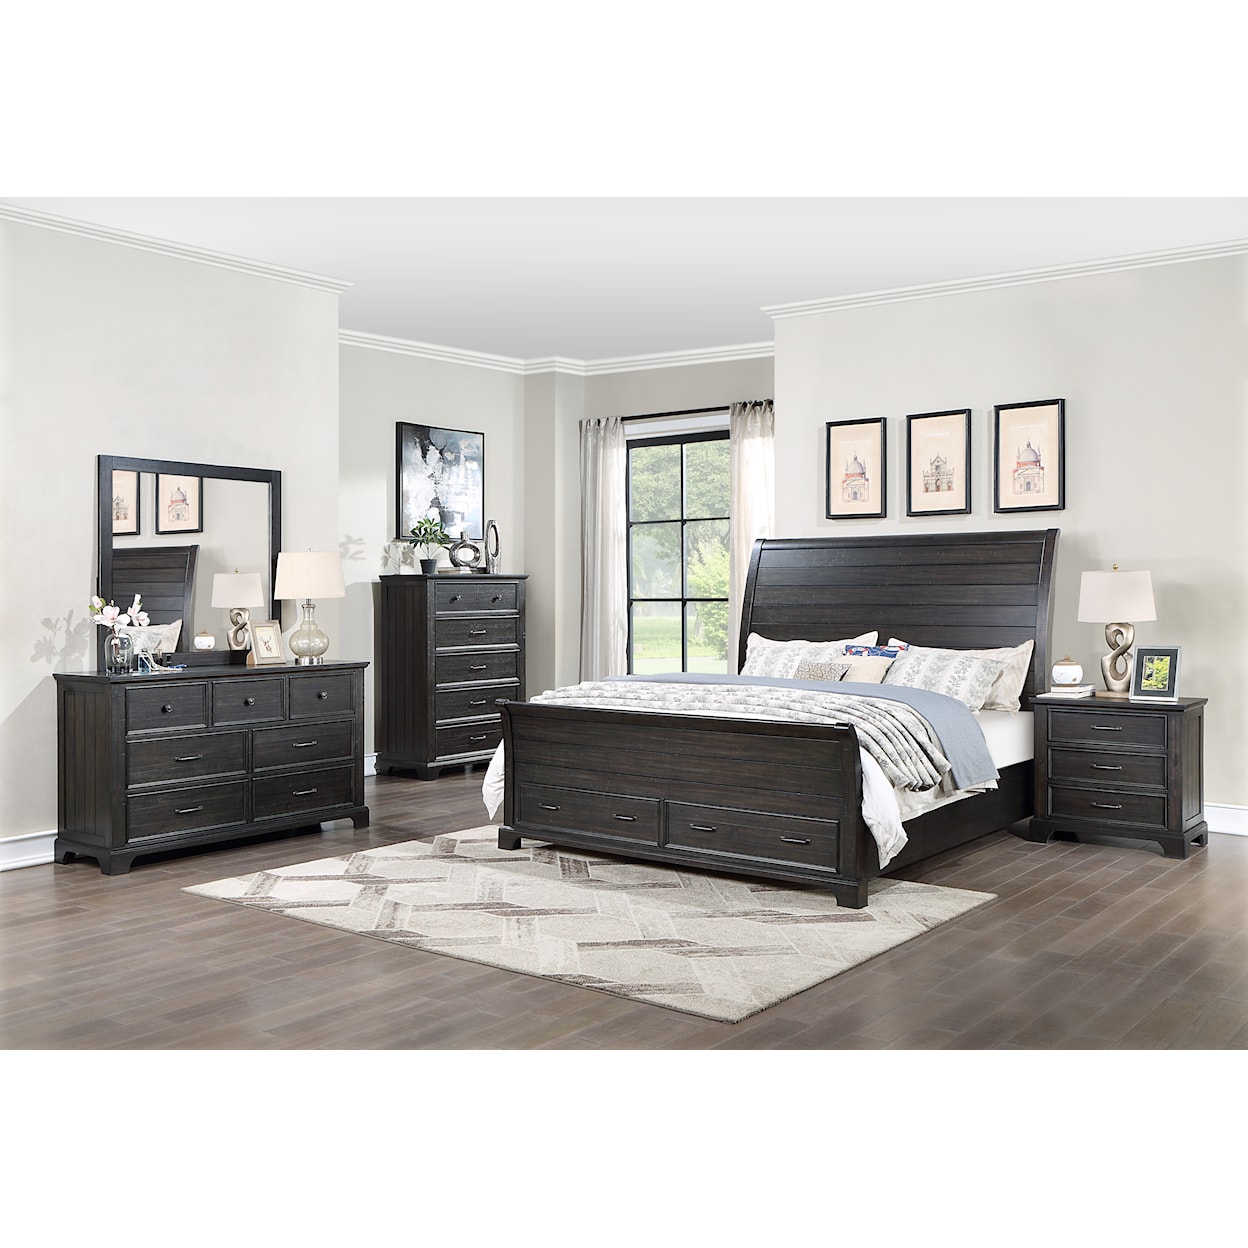 New Classic Furniture Stafford County King Bedroom Set